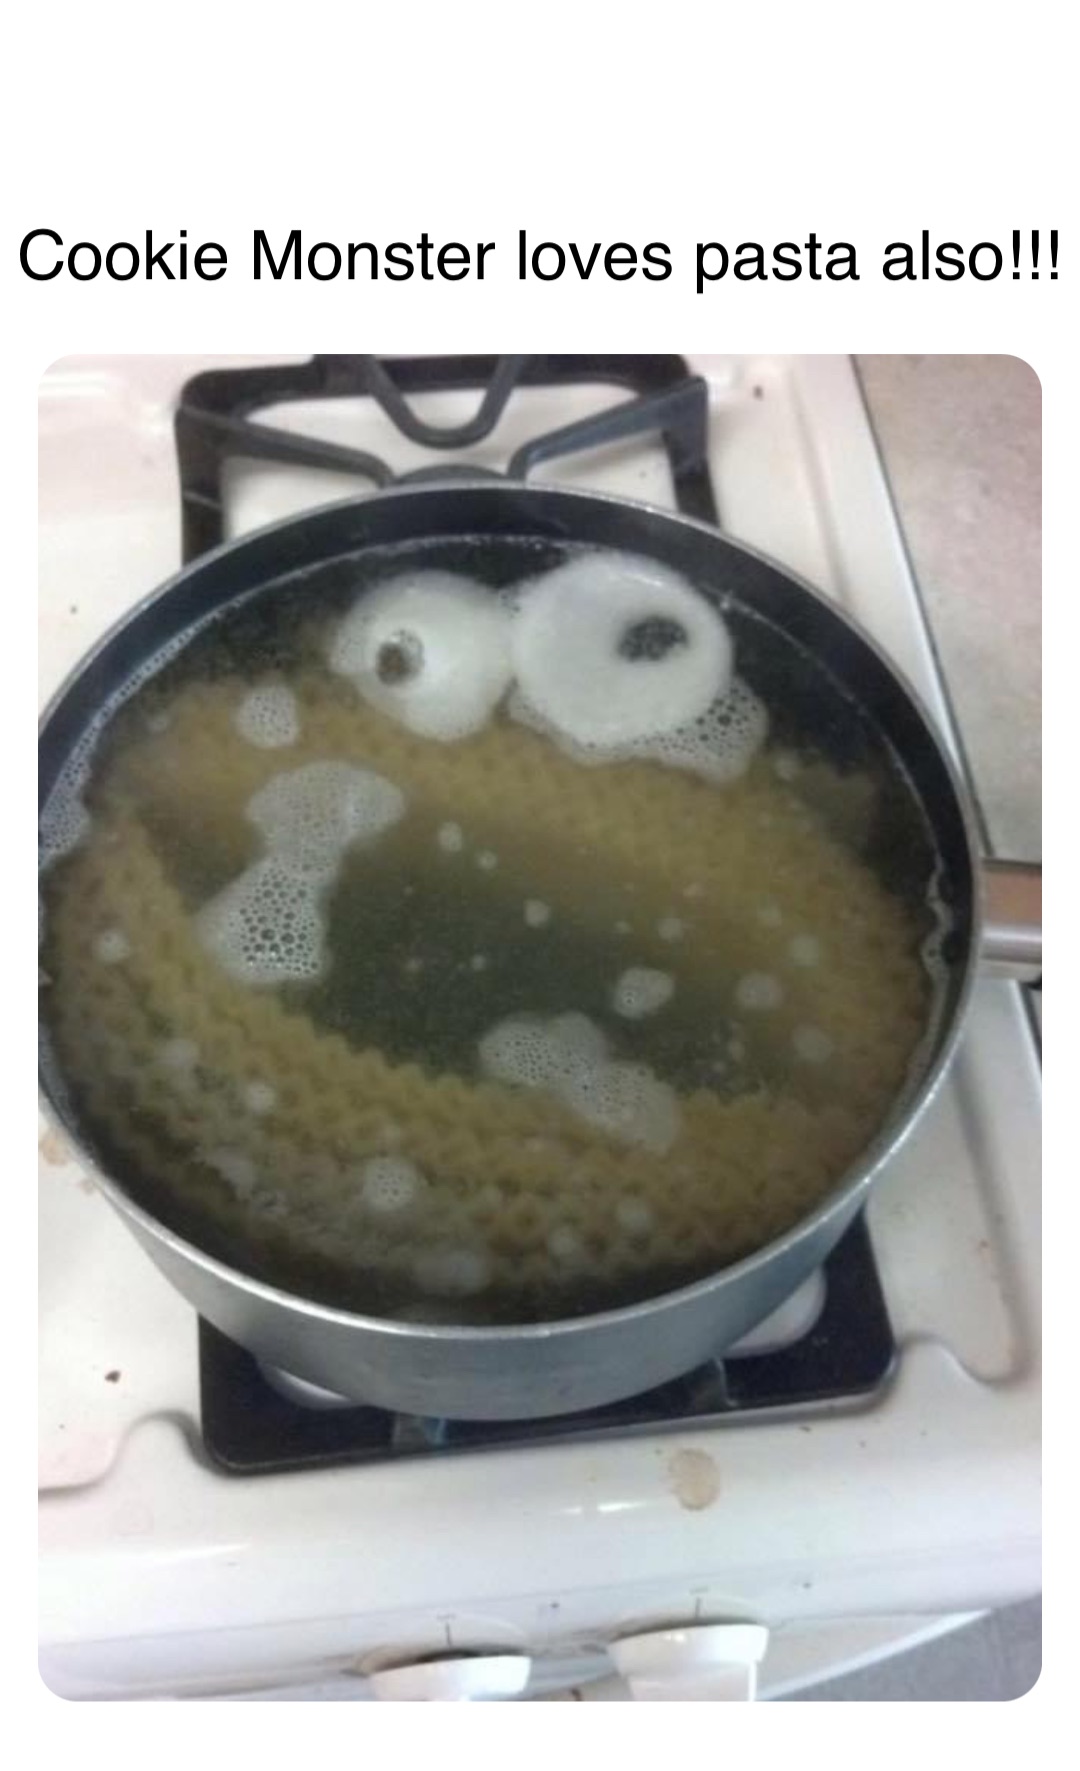 Double tap to edit Cookie Monster loves pasta also!!!